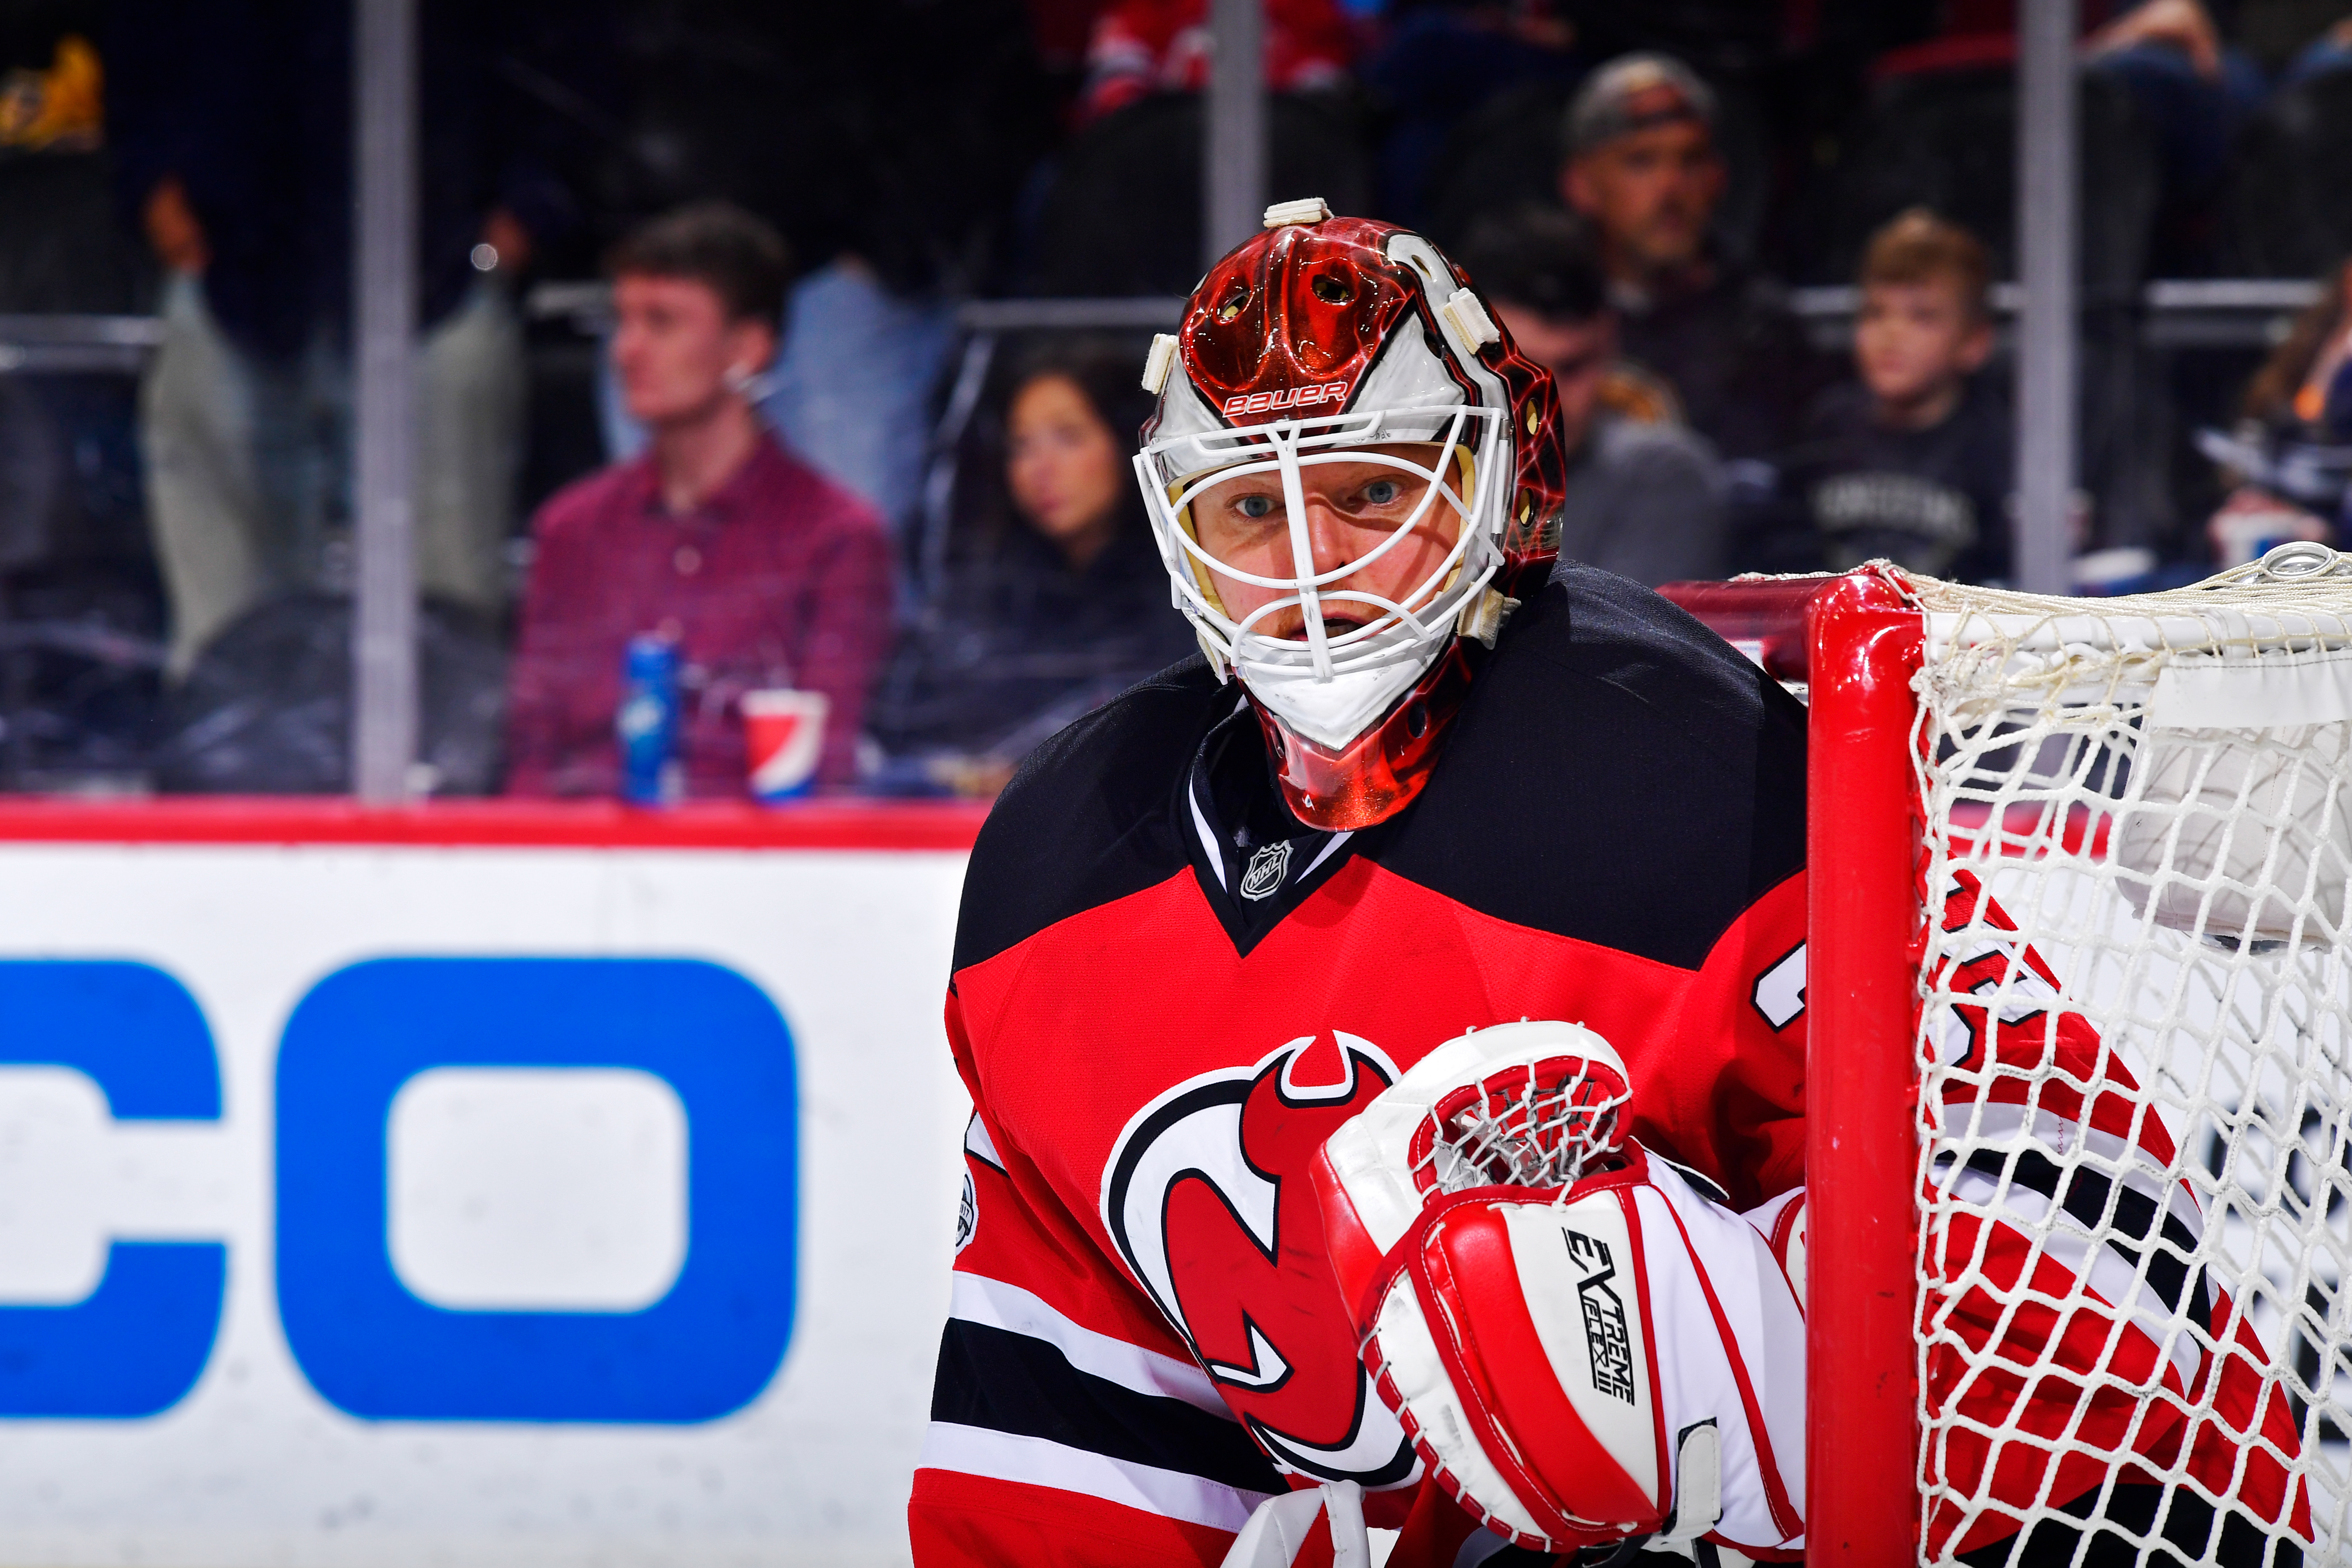 Cory Schneider gets the start today - New Jersey Devils